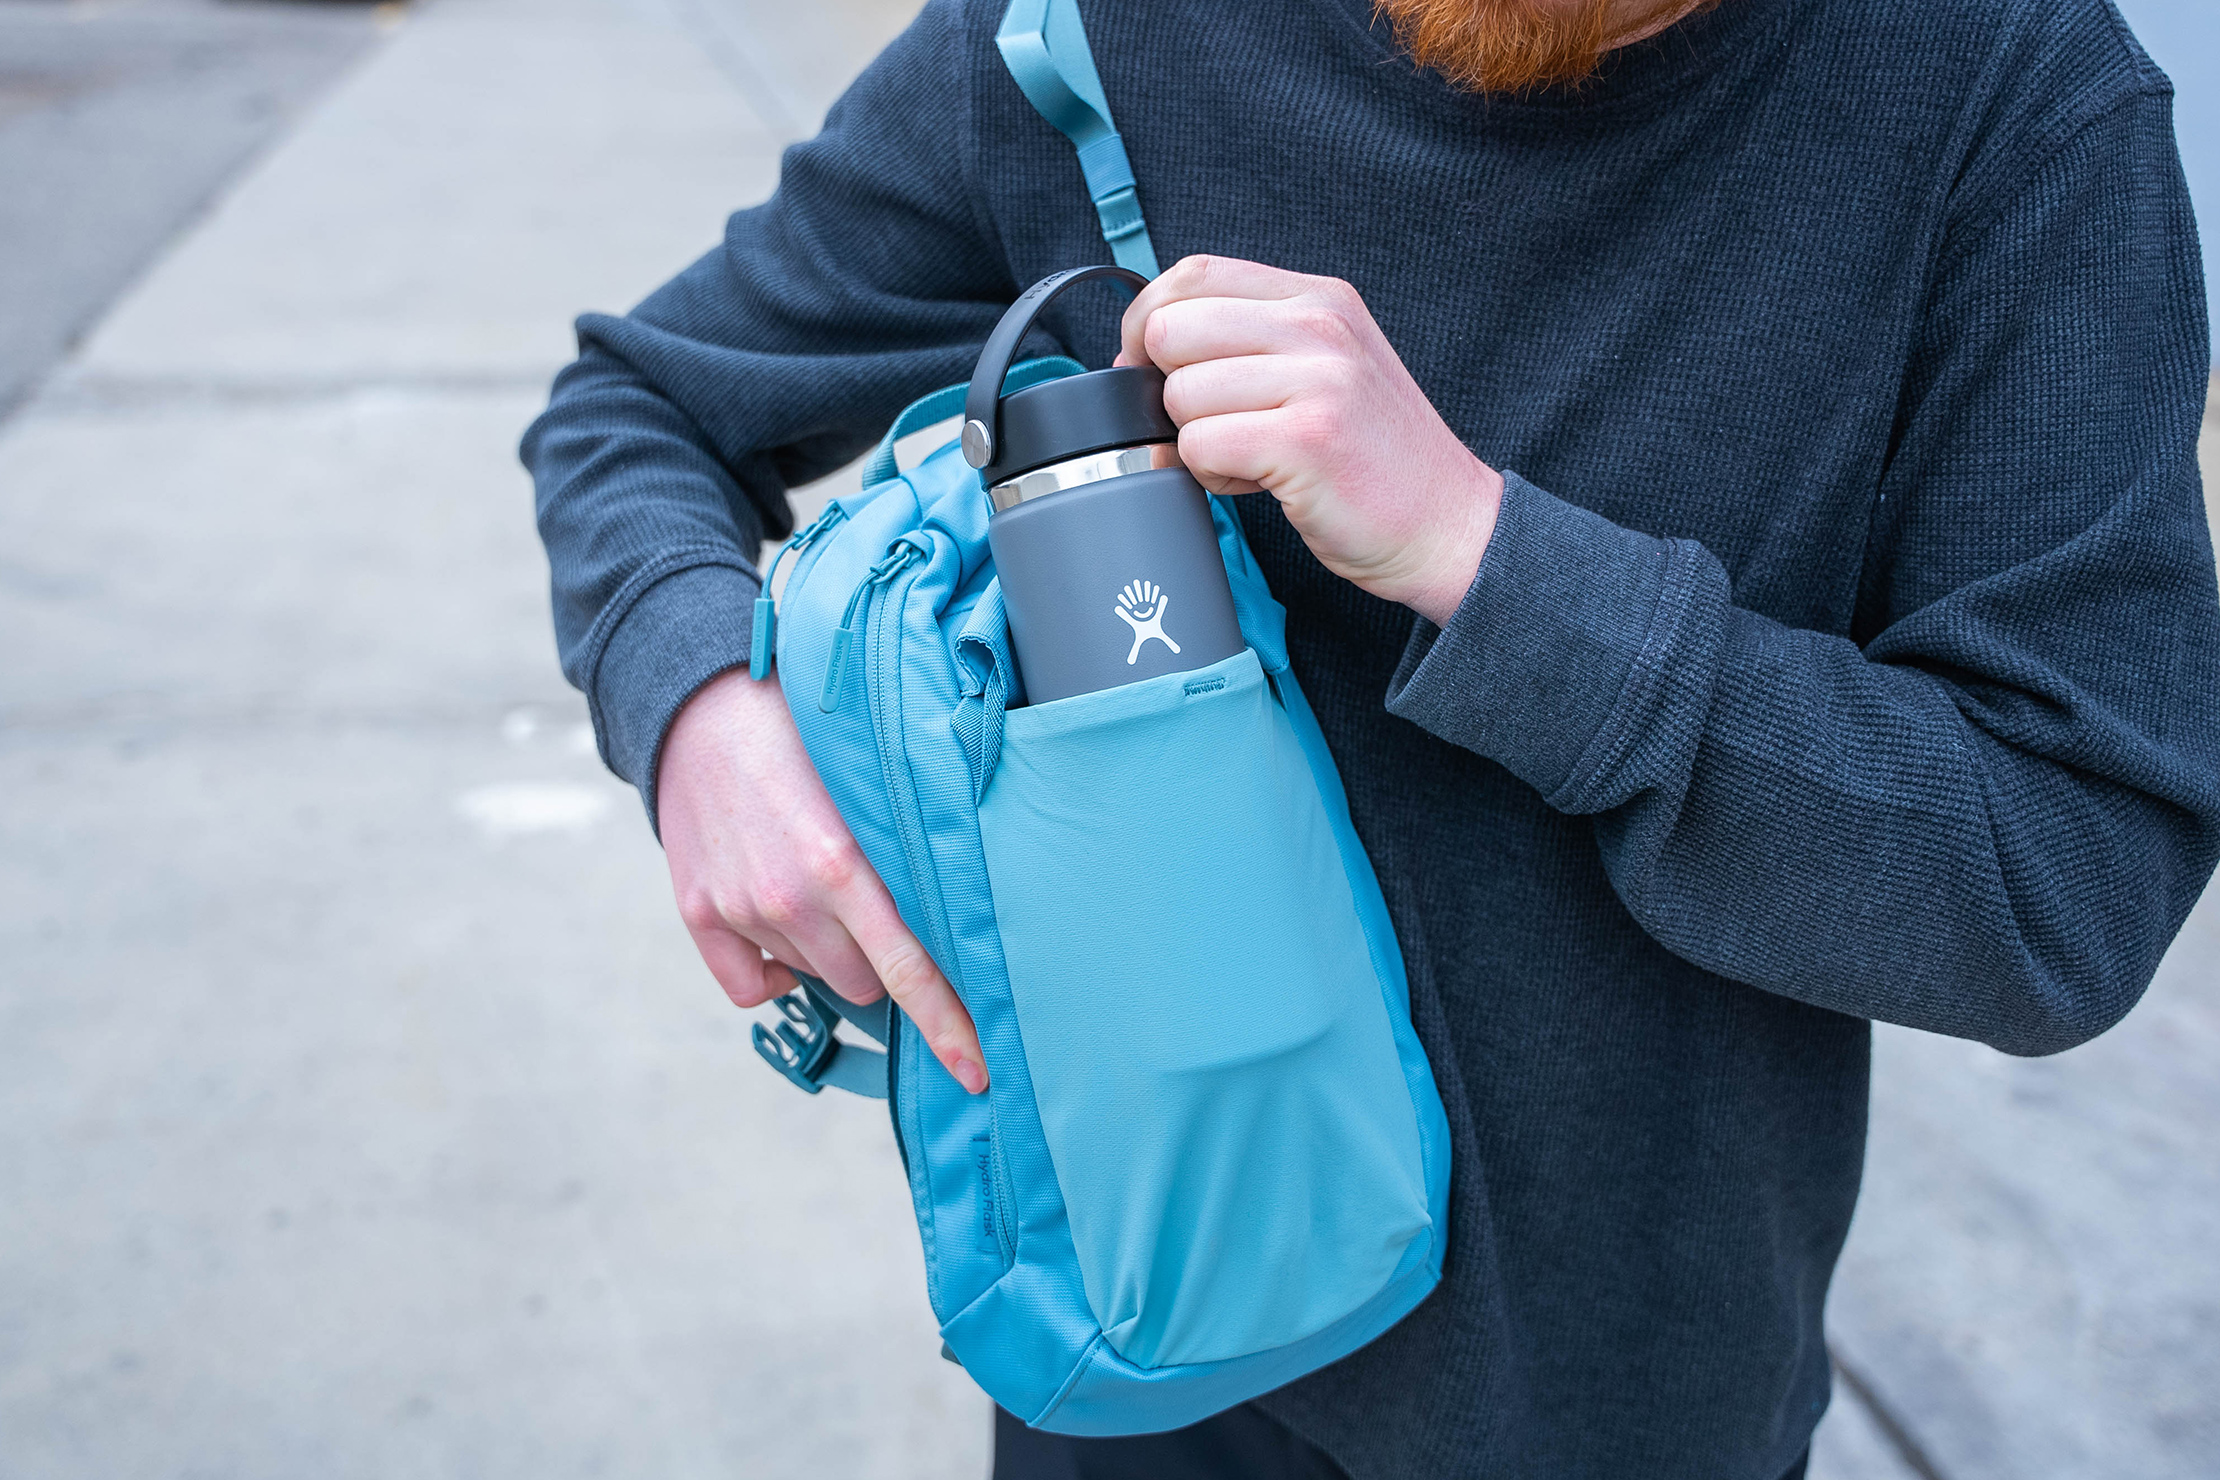 Hydro Flask Slingback Bottle Pack In Use